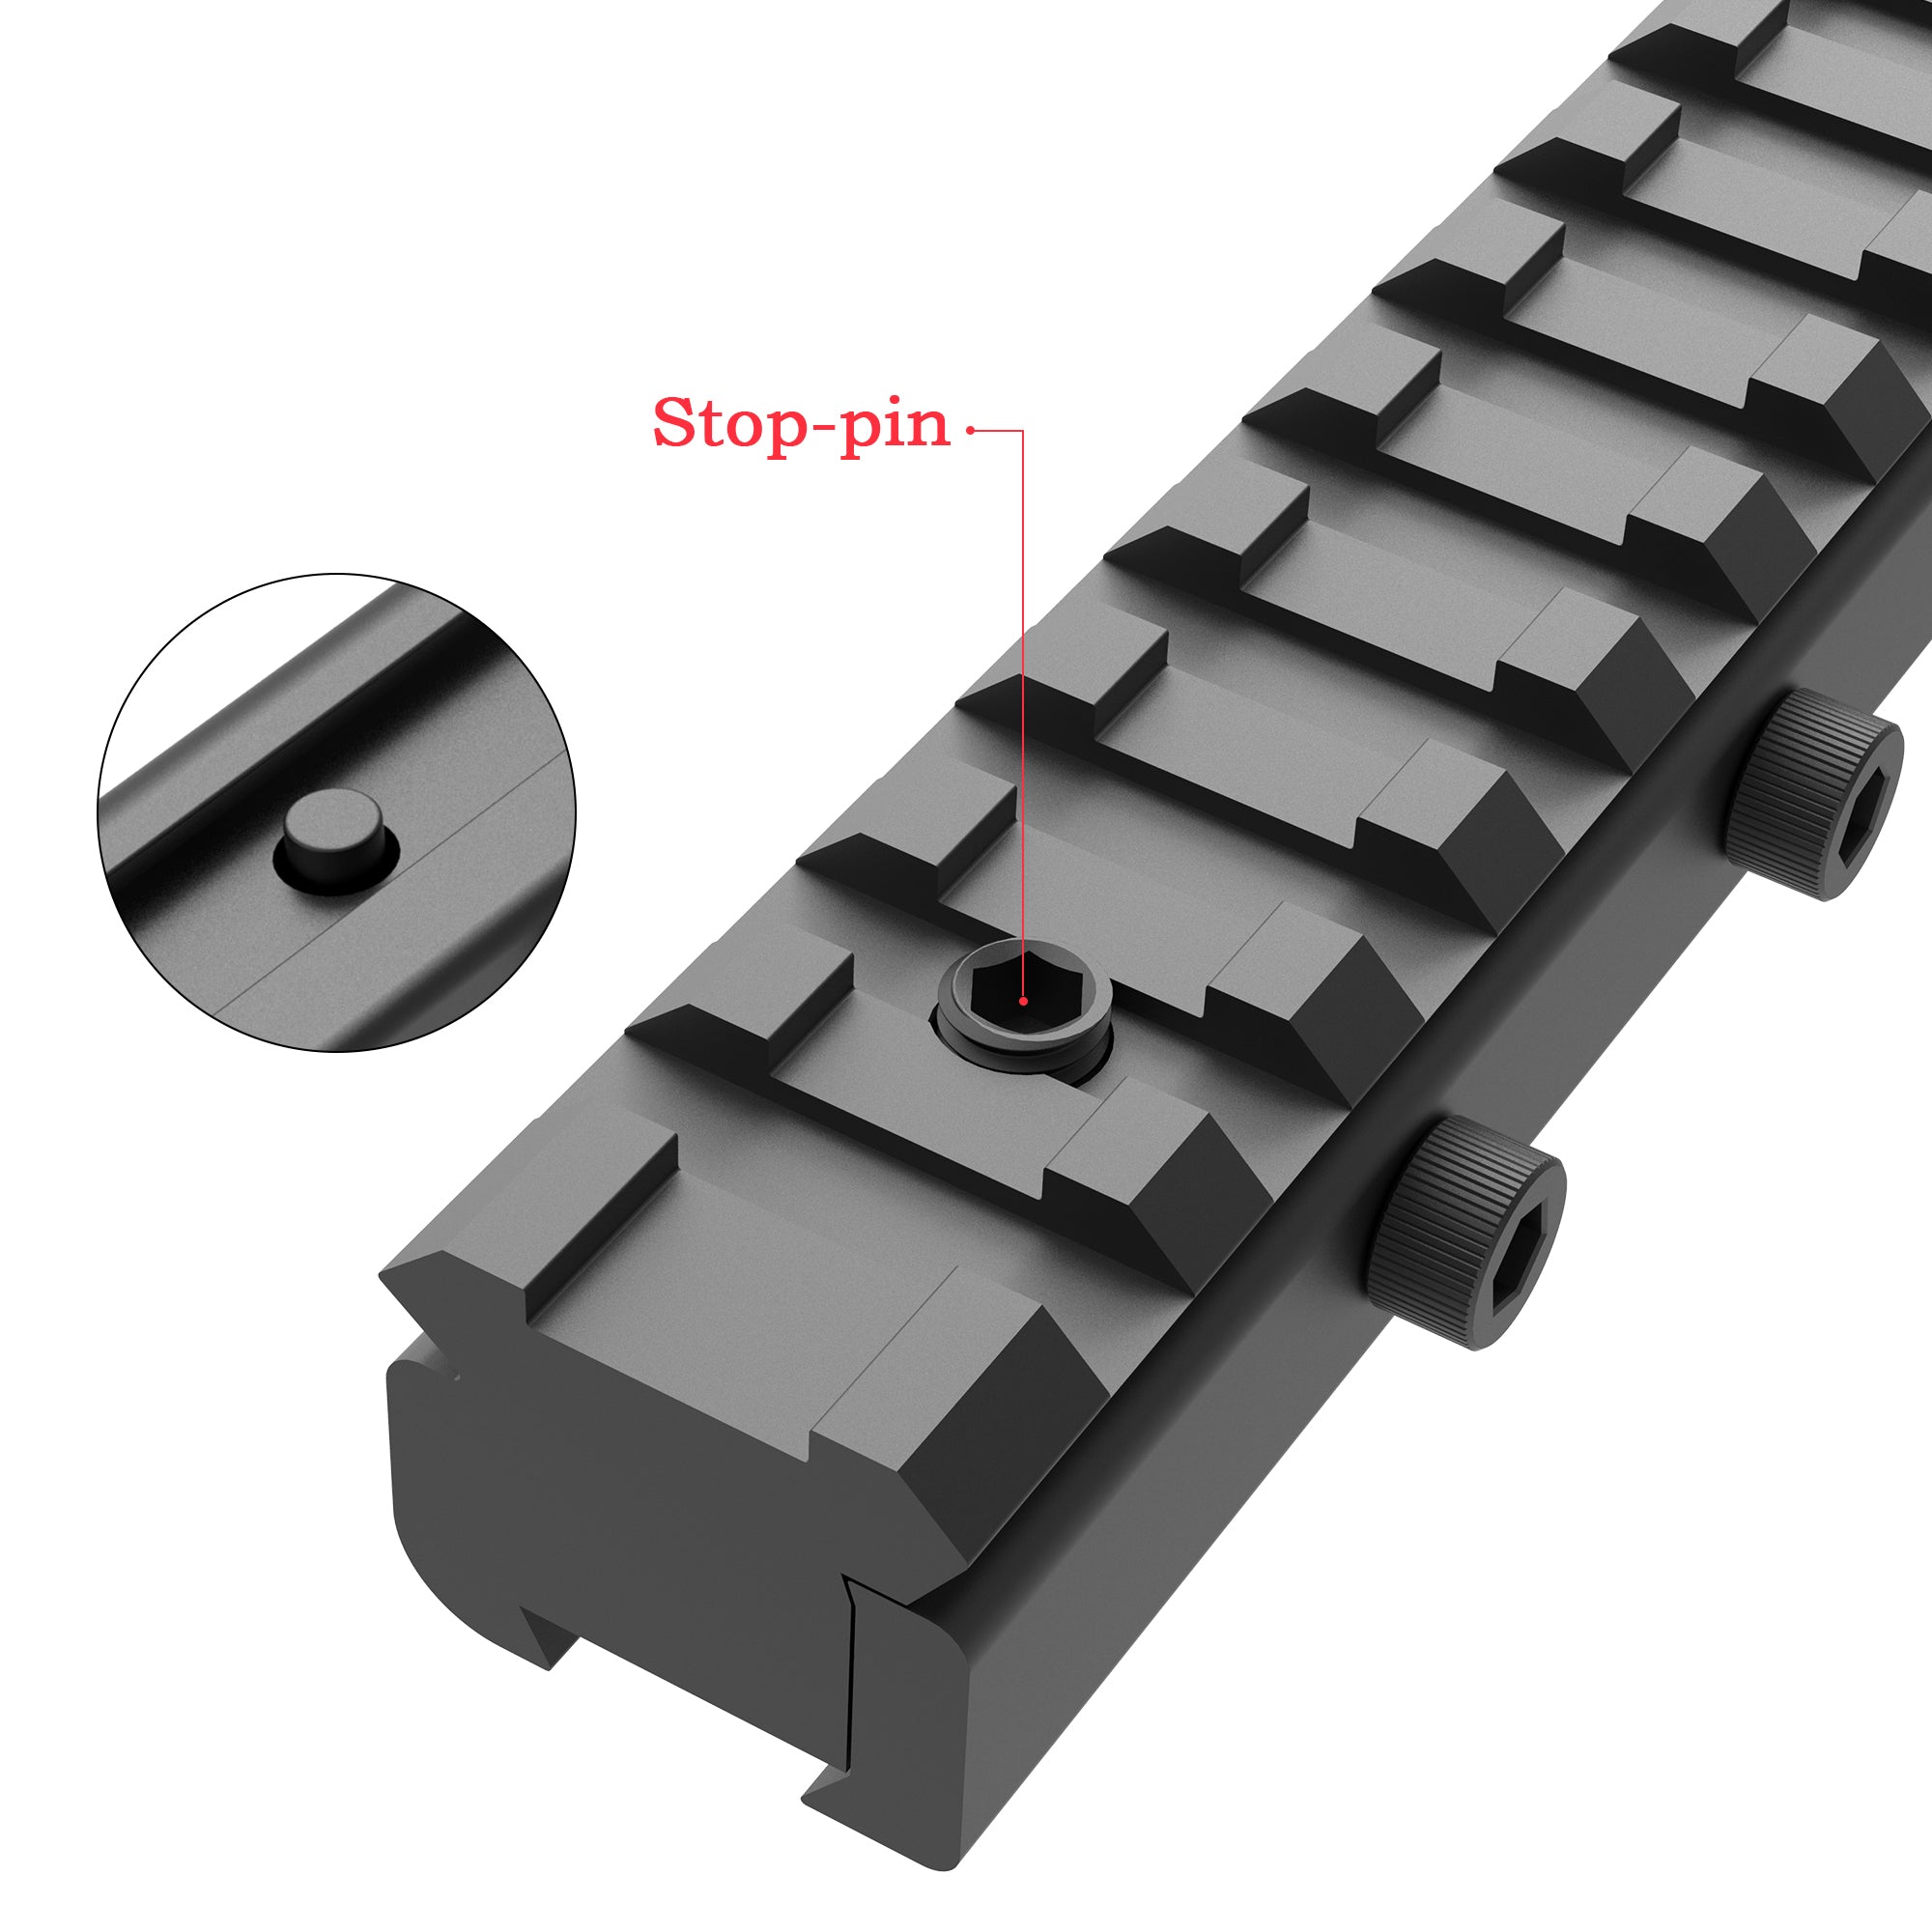 Sniper Dovetail 3/8 11mm 9mm 15mm to Picatinny 7/8 21mm Rail Mount  Adapter, Matte black - Yahoo Shopping